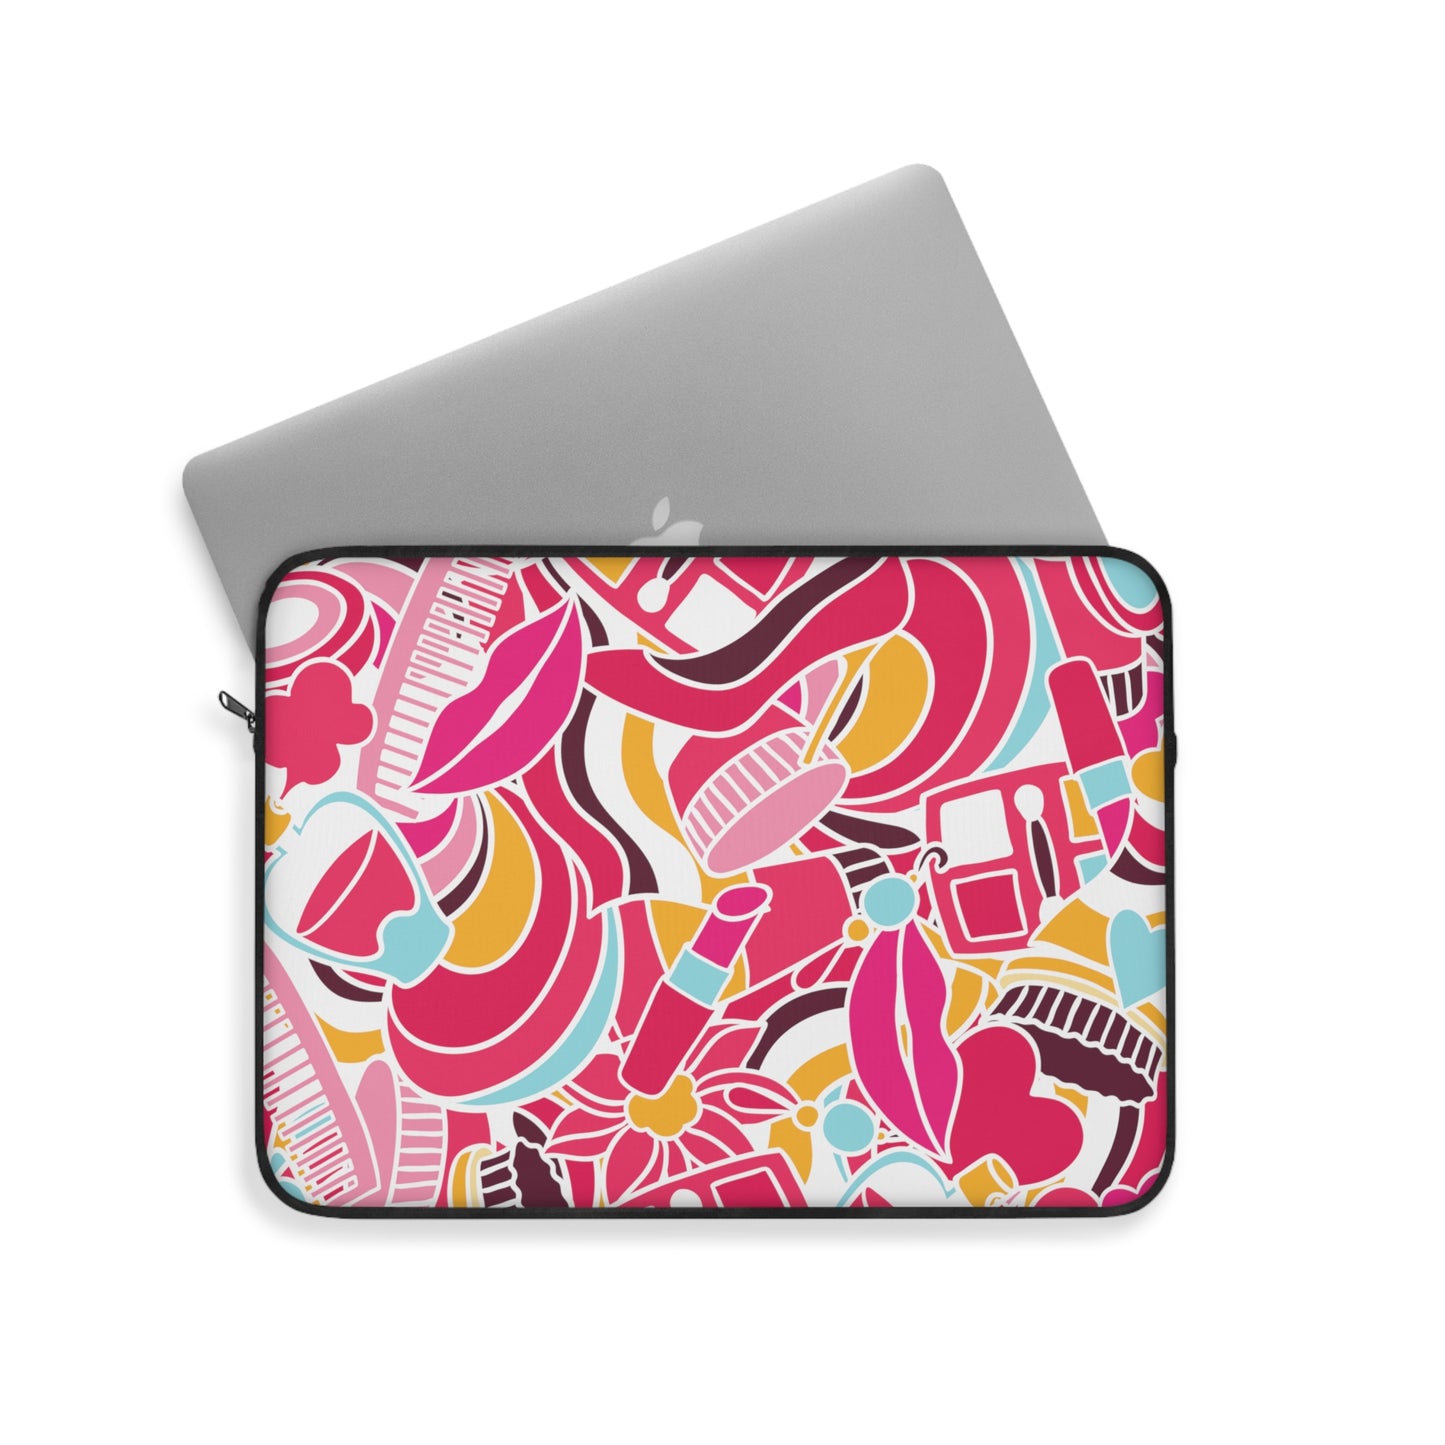 Mock-up of a laptop and a sleeve - all sizes